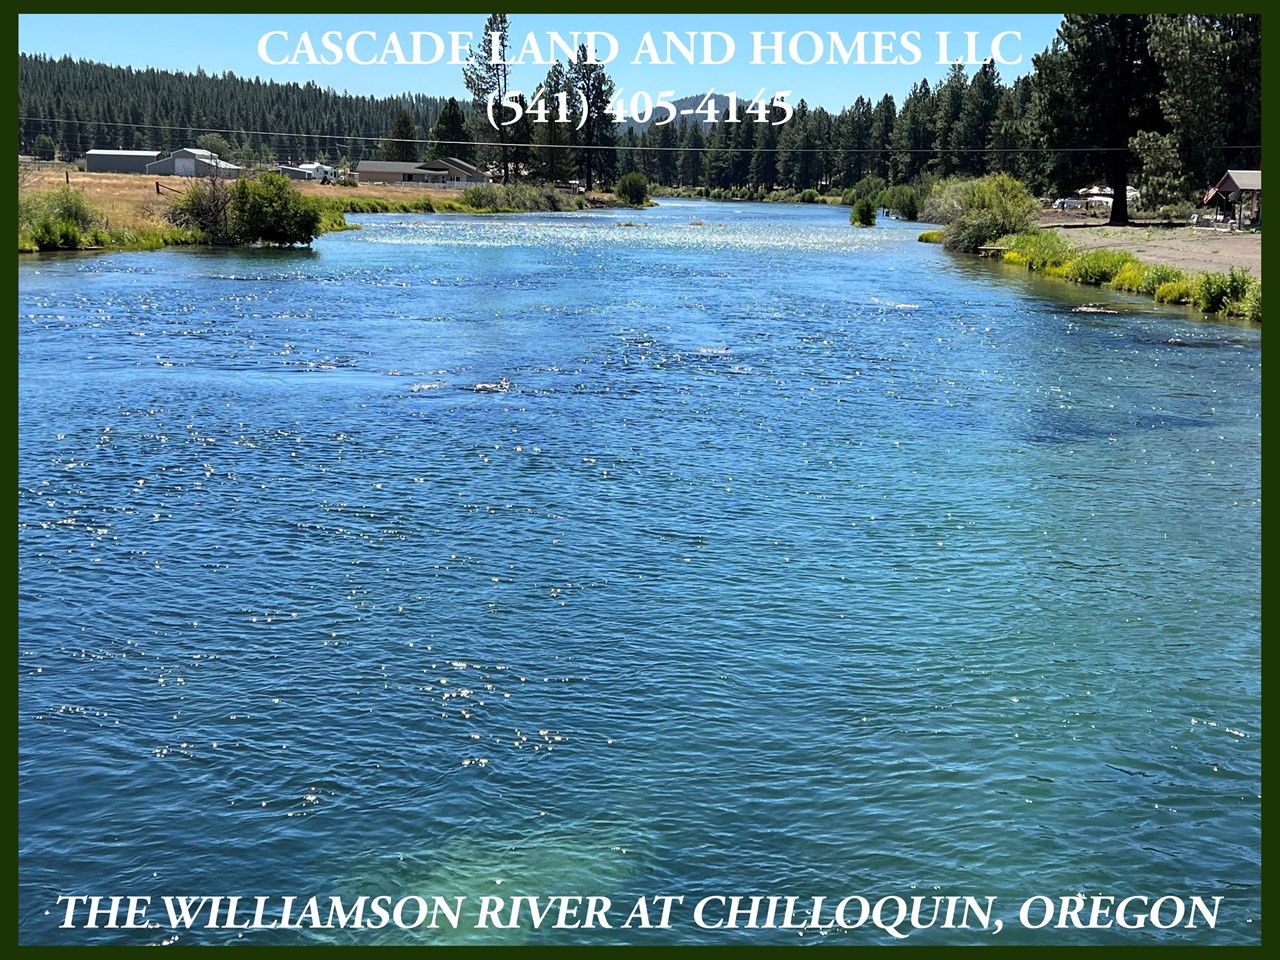 the majestic williamson river flows through nearby chiloquin, just a few miles from the property and into the upper klamath lake, supplying the primary source of fresh water to the largest freshwater lake in oregon! the williamson river is famous for world-class fly fishing! it is also fantastic for floating, swimming, canoeing, kayaking, or just soaking up the sunshine watching the clear waters flow peacefully by.